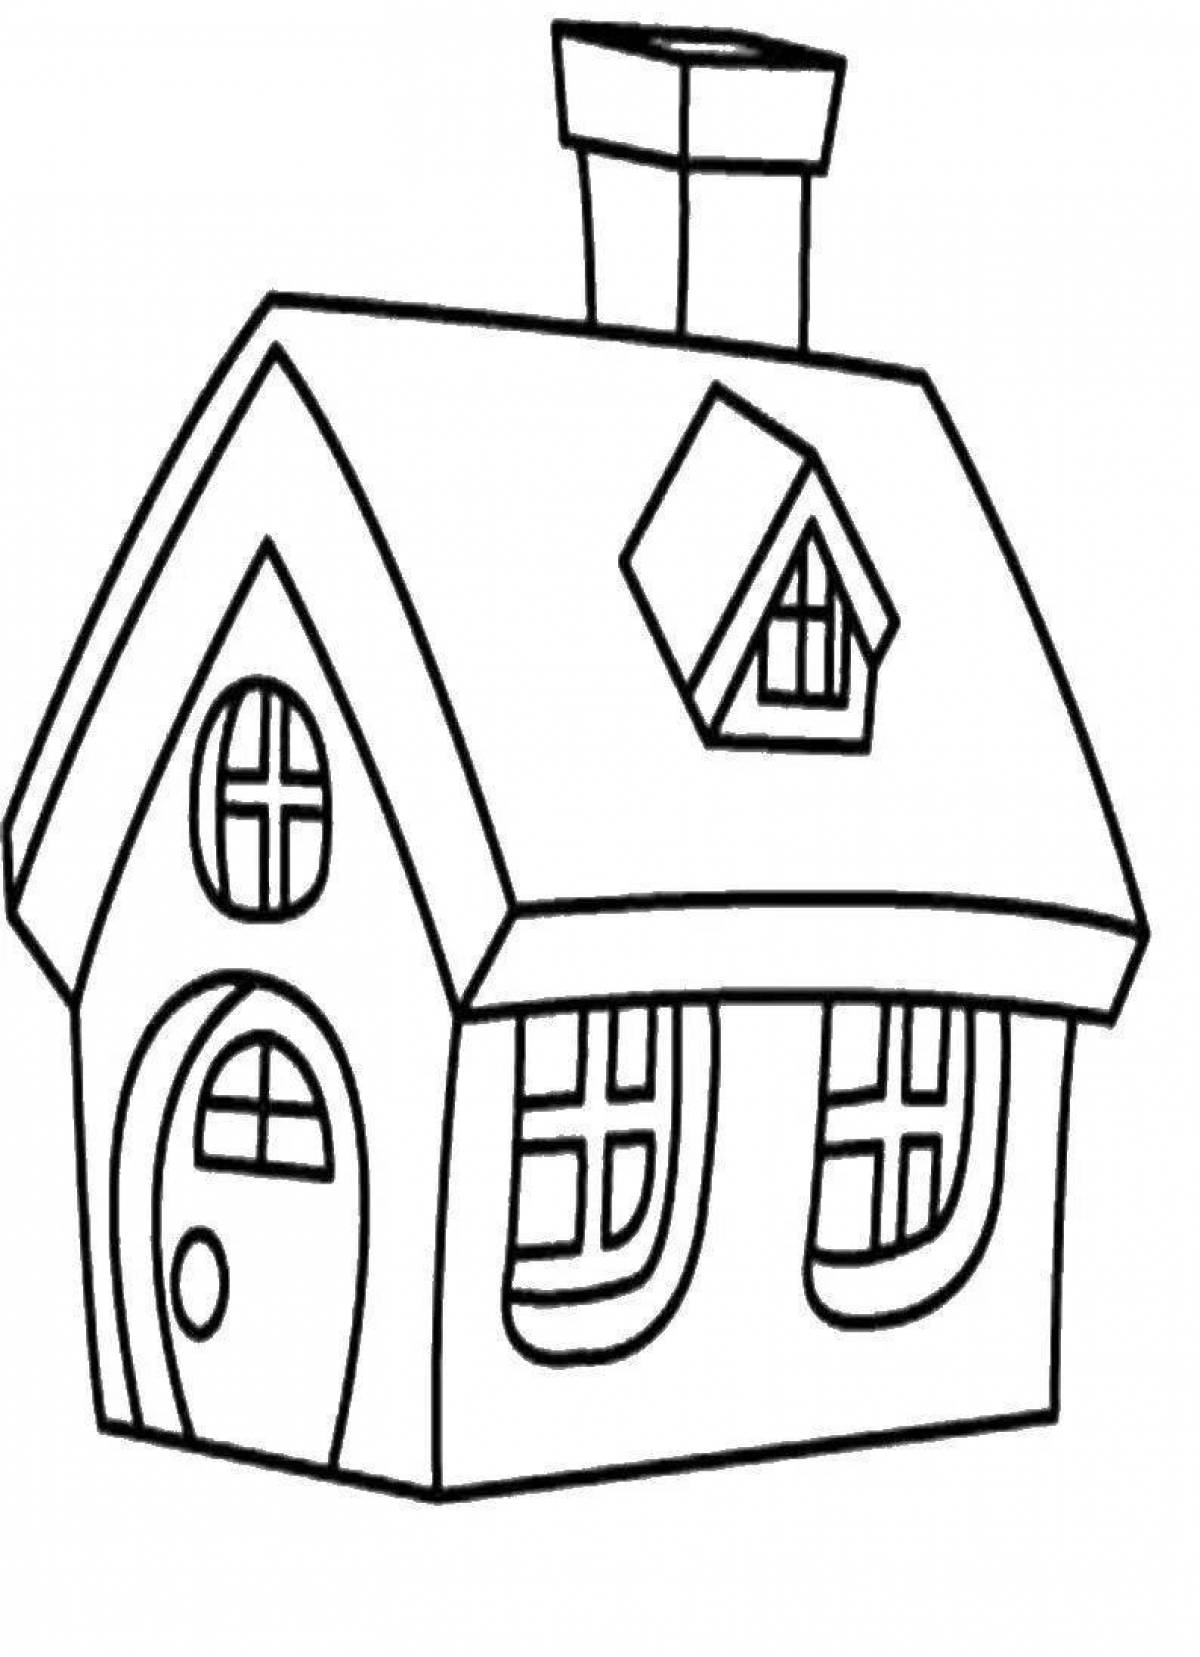 Exciting drawing of a house